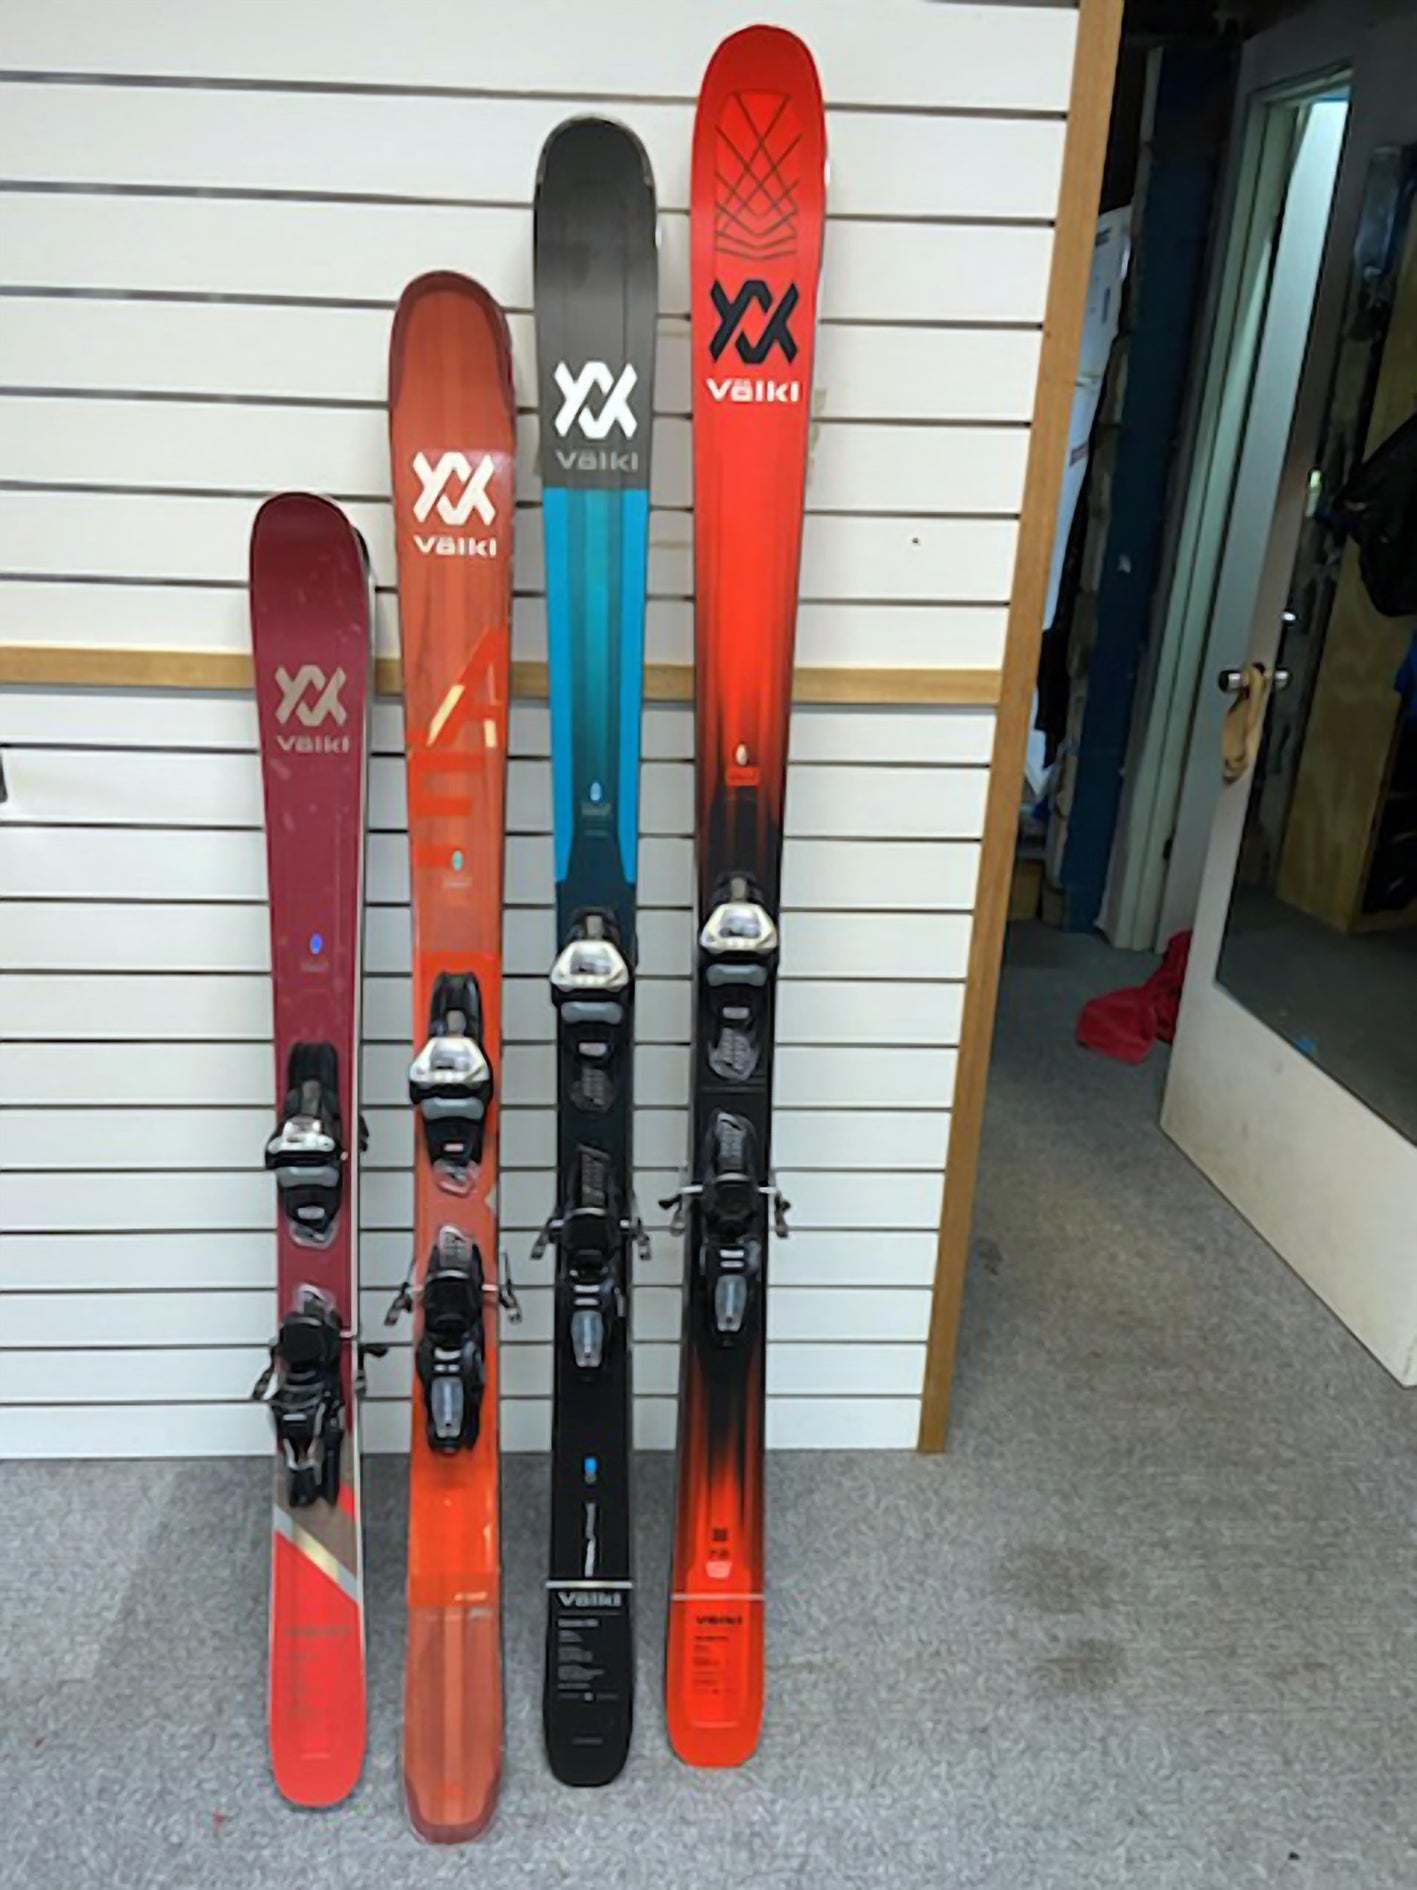 ADULT Demo. Skis, Boots, Poles